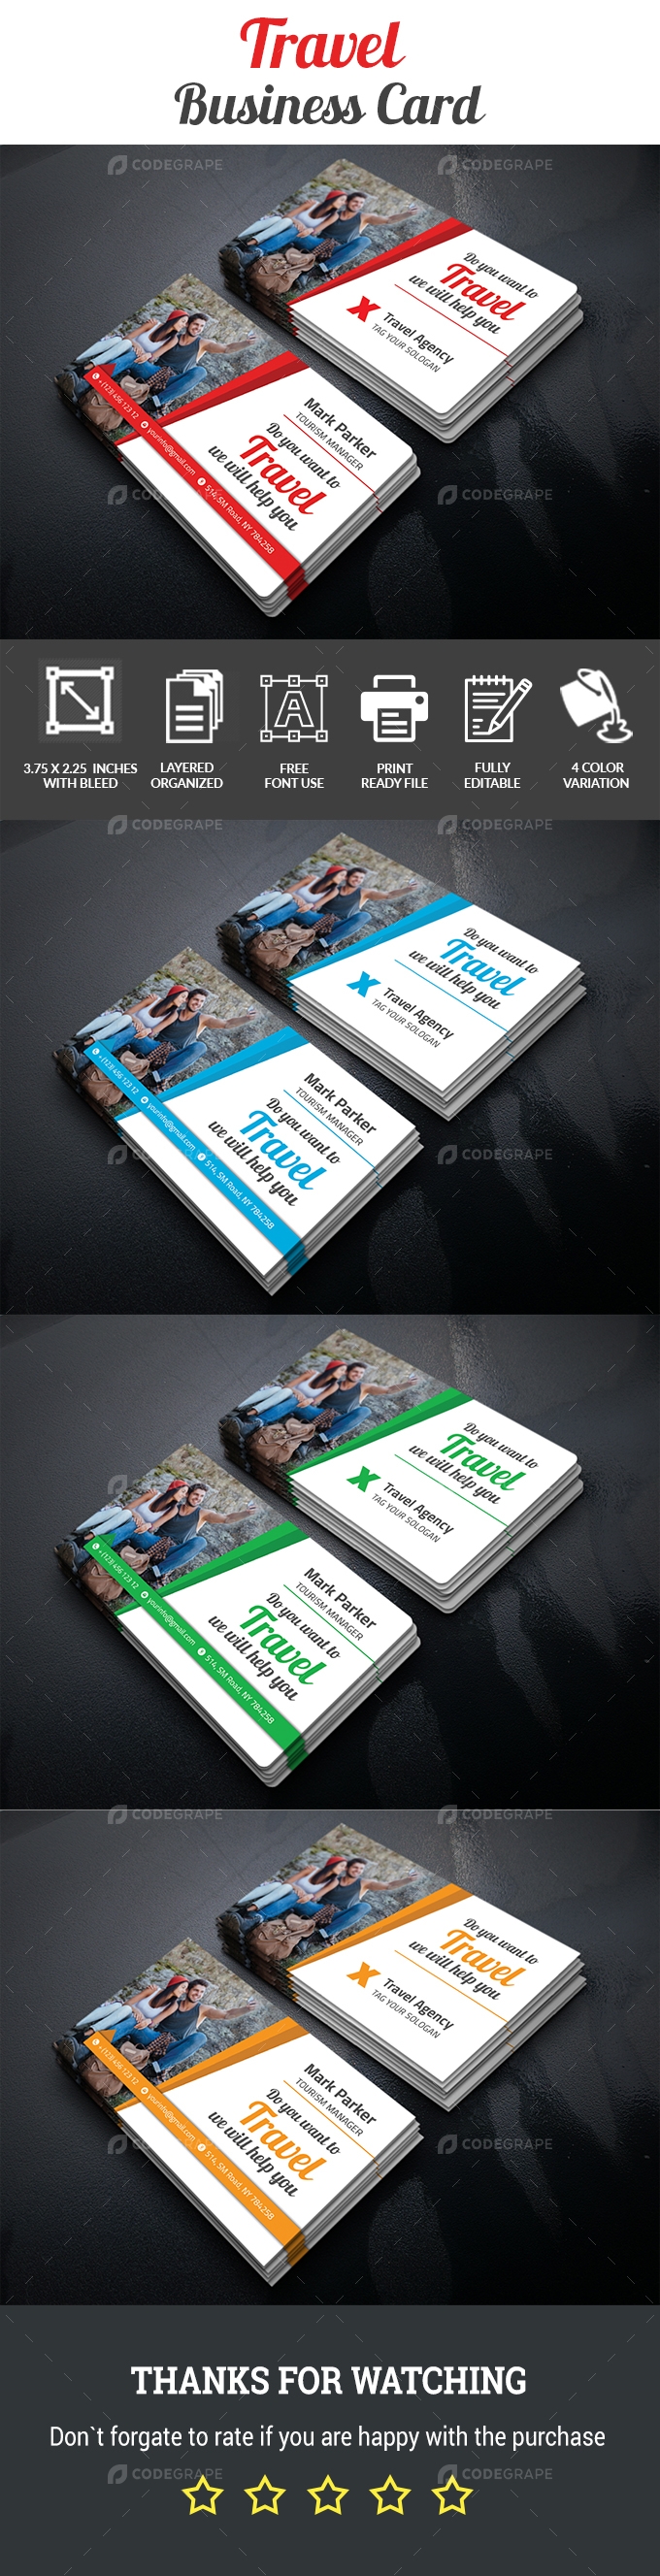 Corporate Travel  Business Card